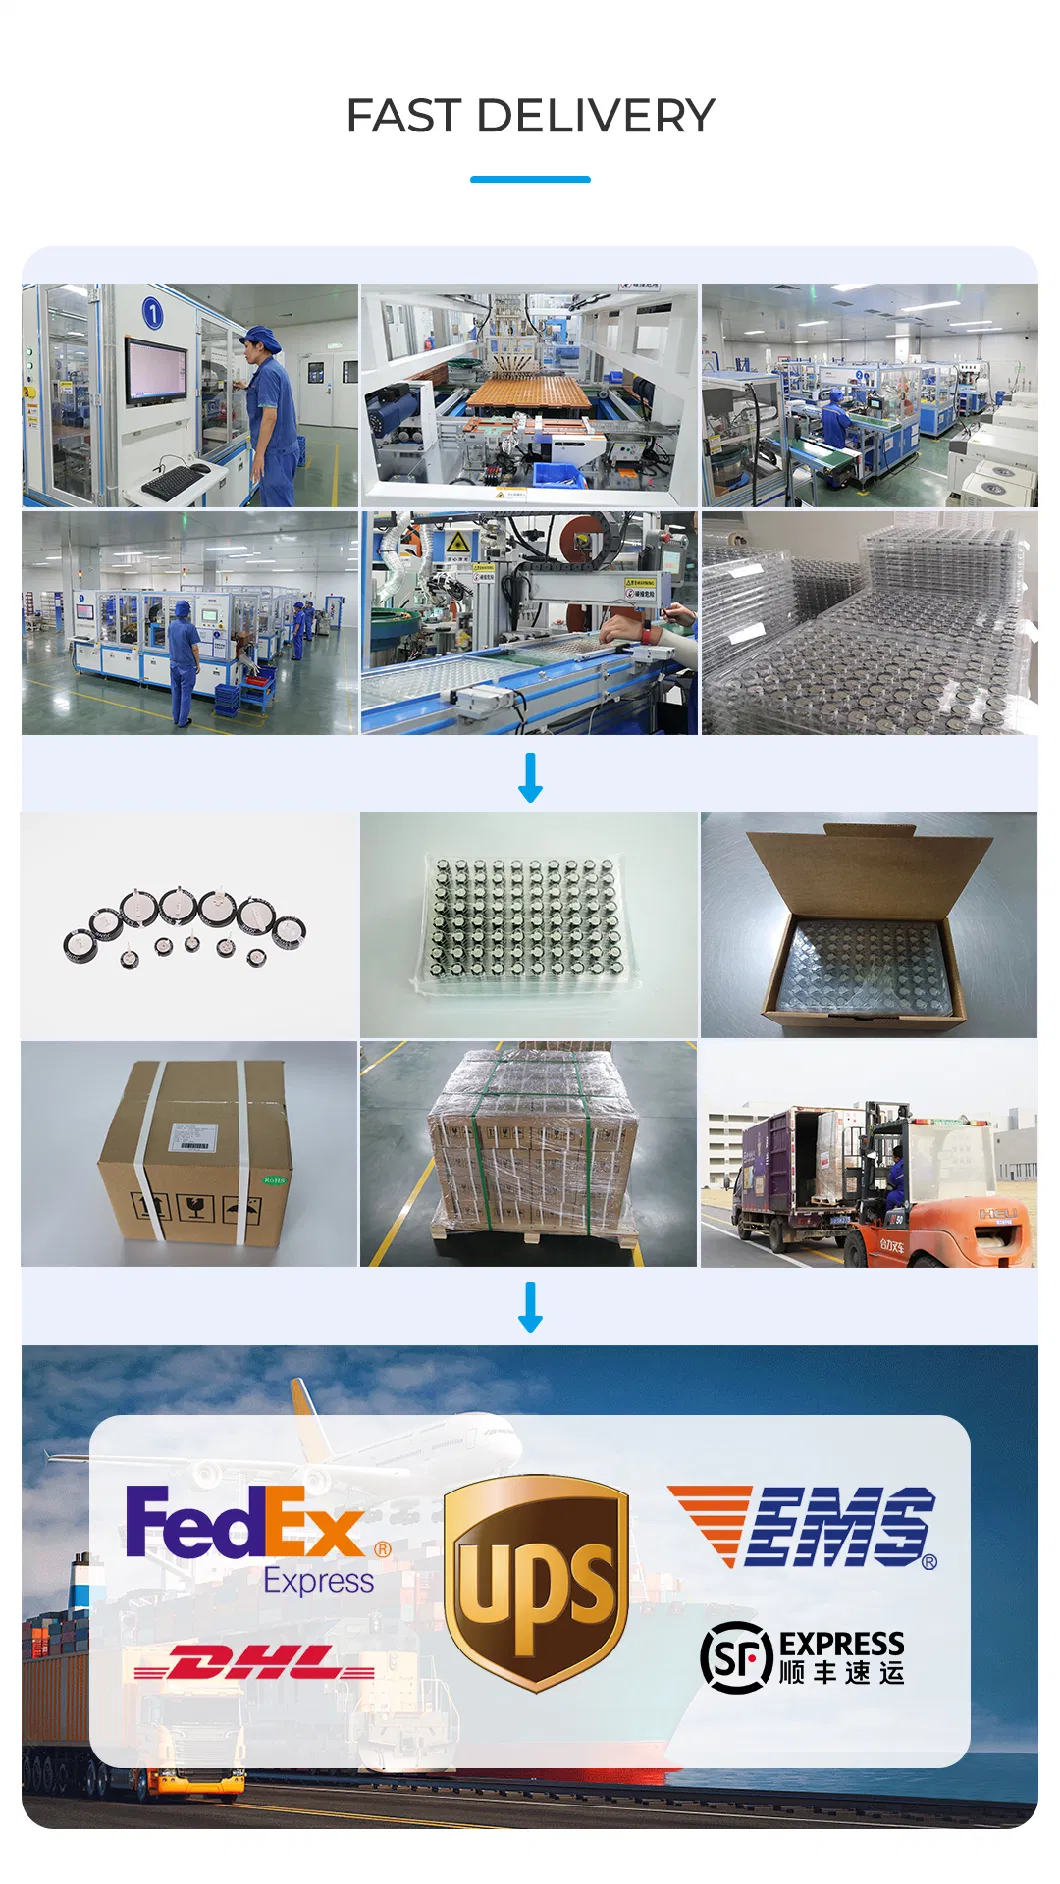 5.5V 0.1/0.22/0.33/0.47/1/1.5/4f Farad Ultra Capacitor Factory Wholesale Good Price Supercapacitor Cell